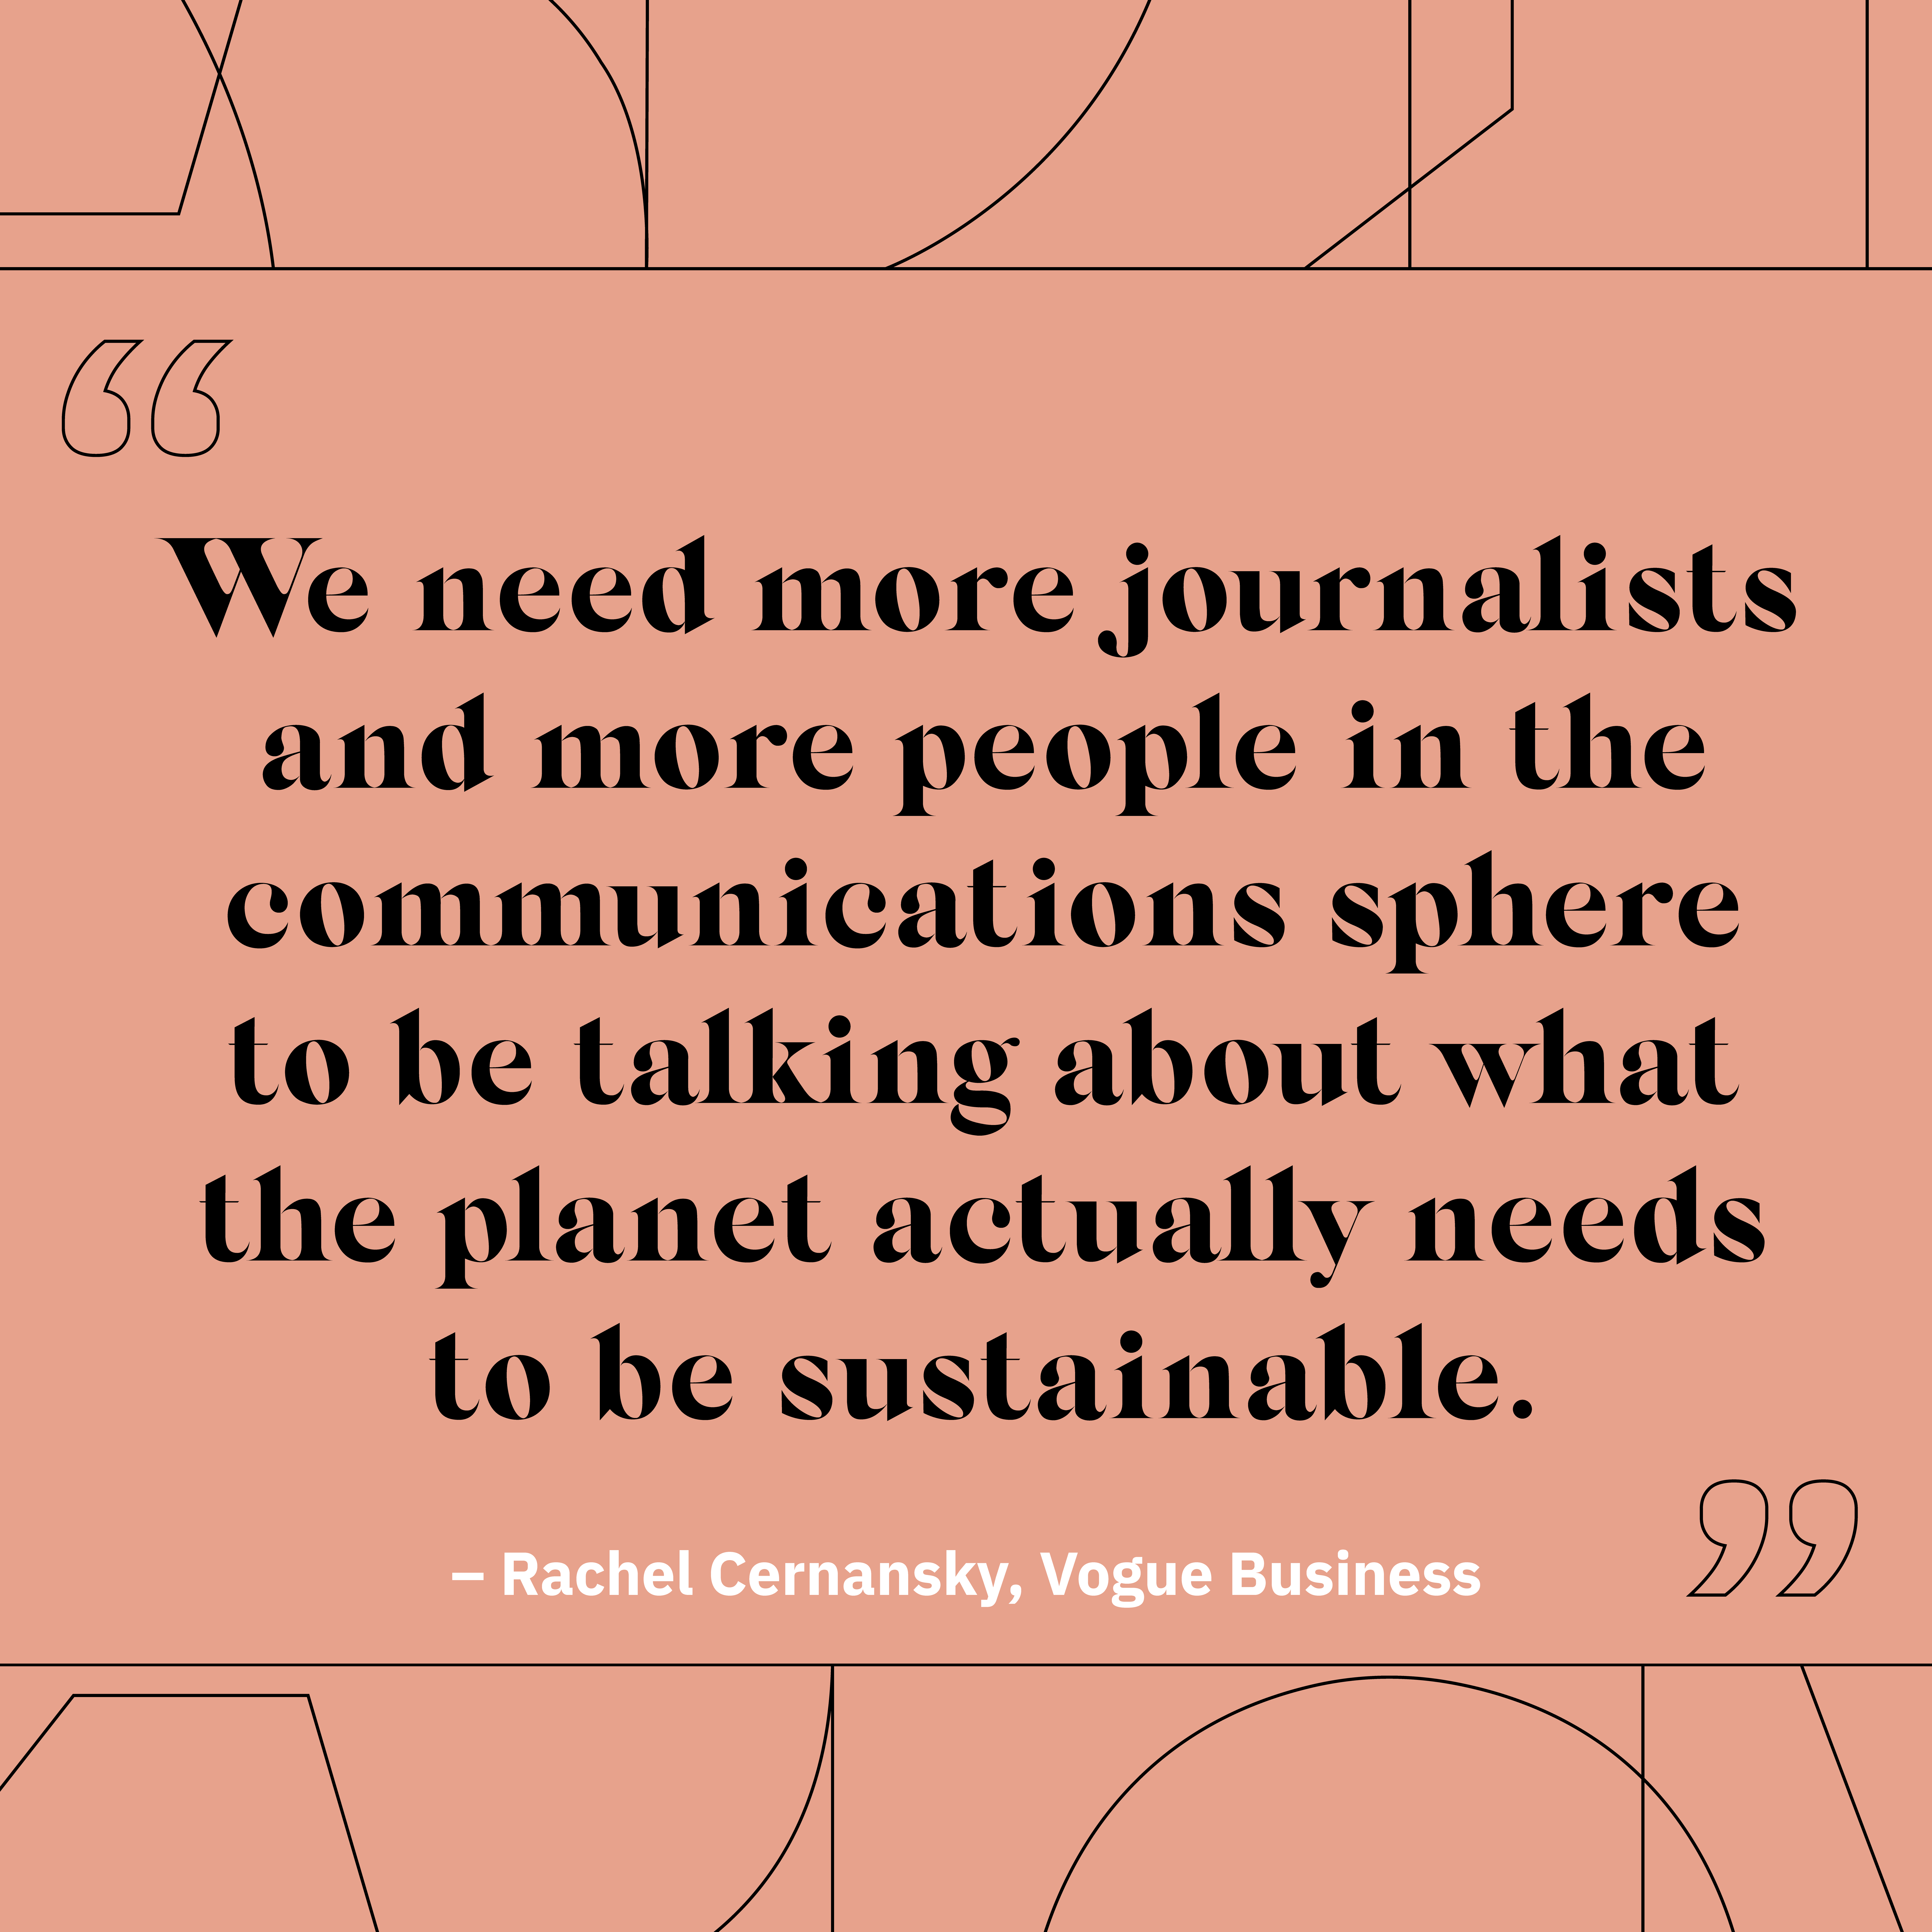 “We need more journalists and more people in the communications sphere to be talking about what the planet actually needs to be sustainable” – Rachel Cernansky, Vogue Business 